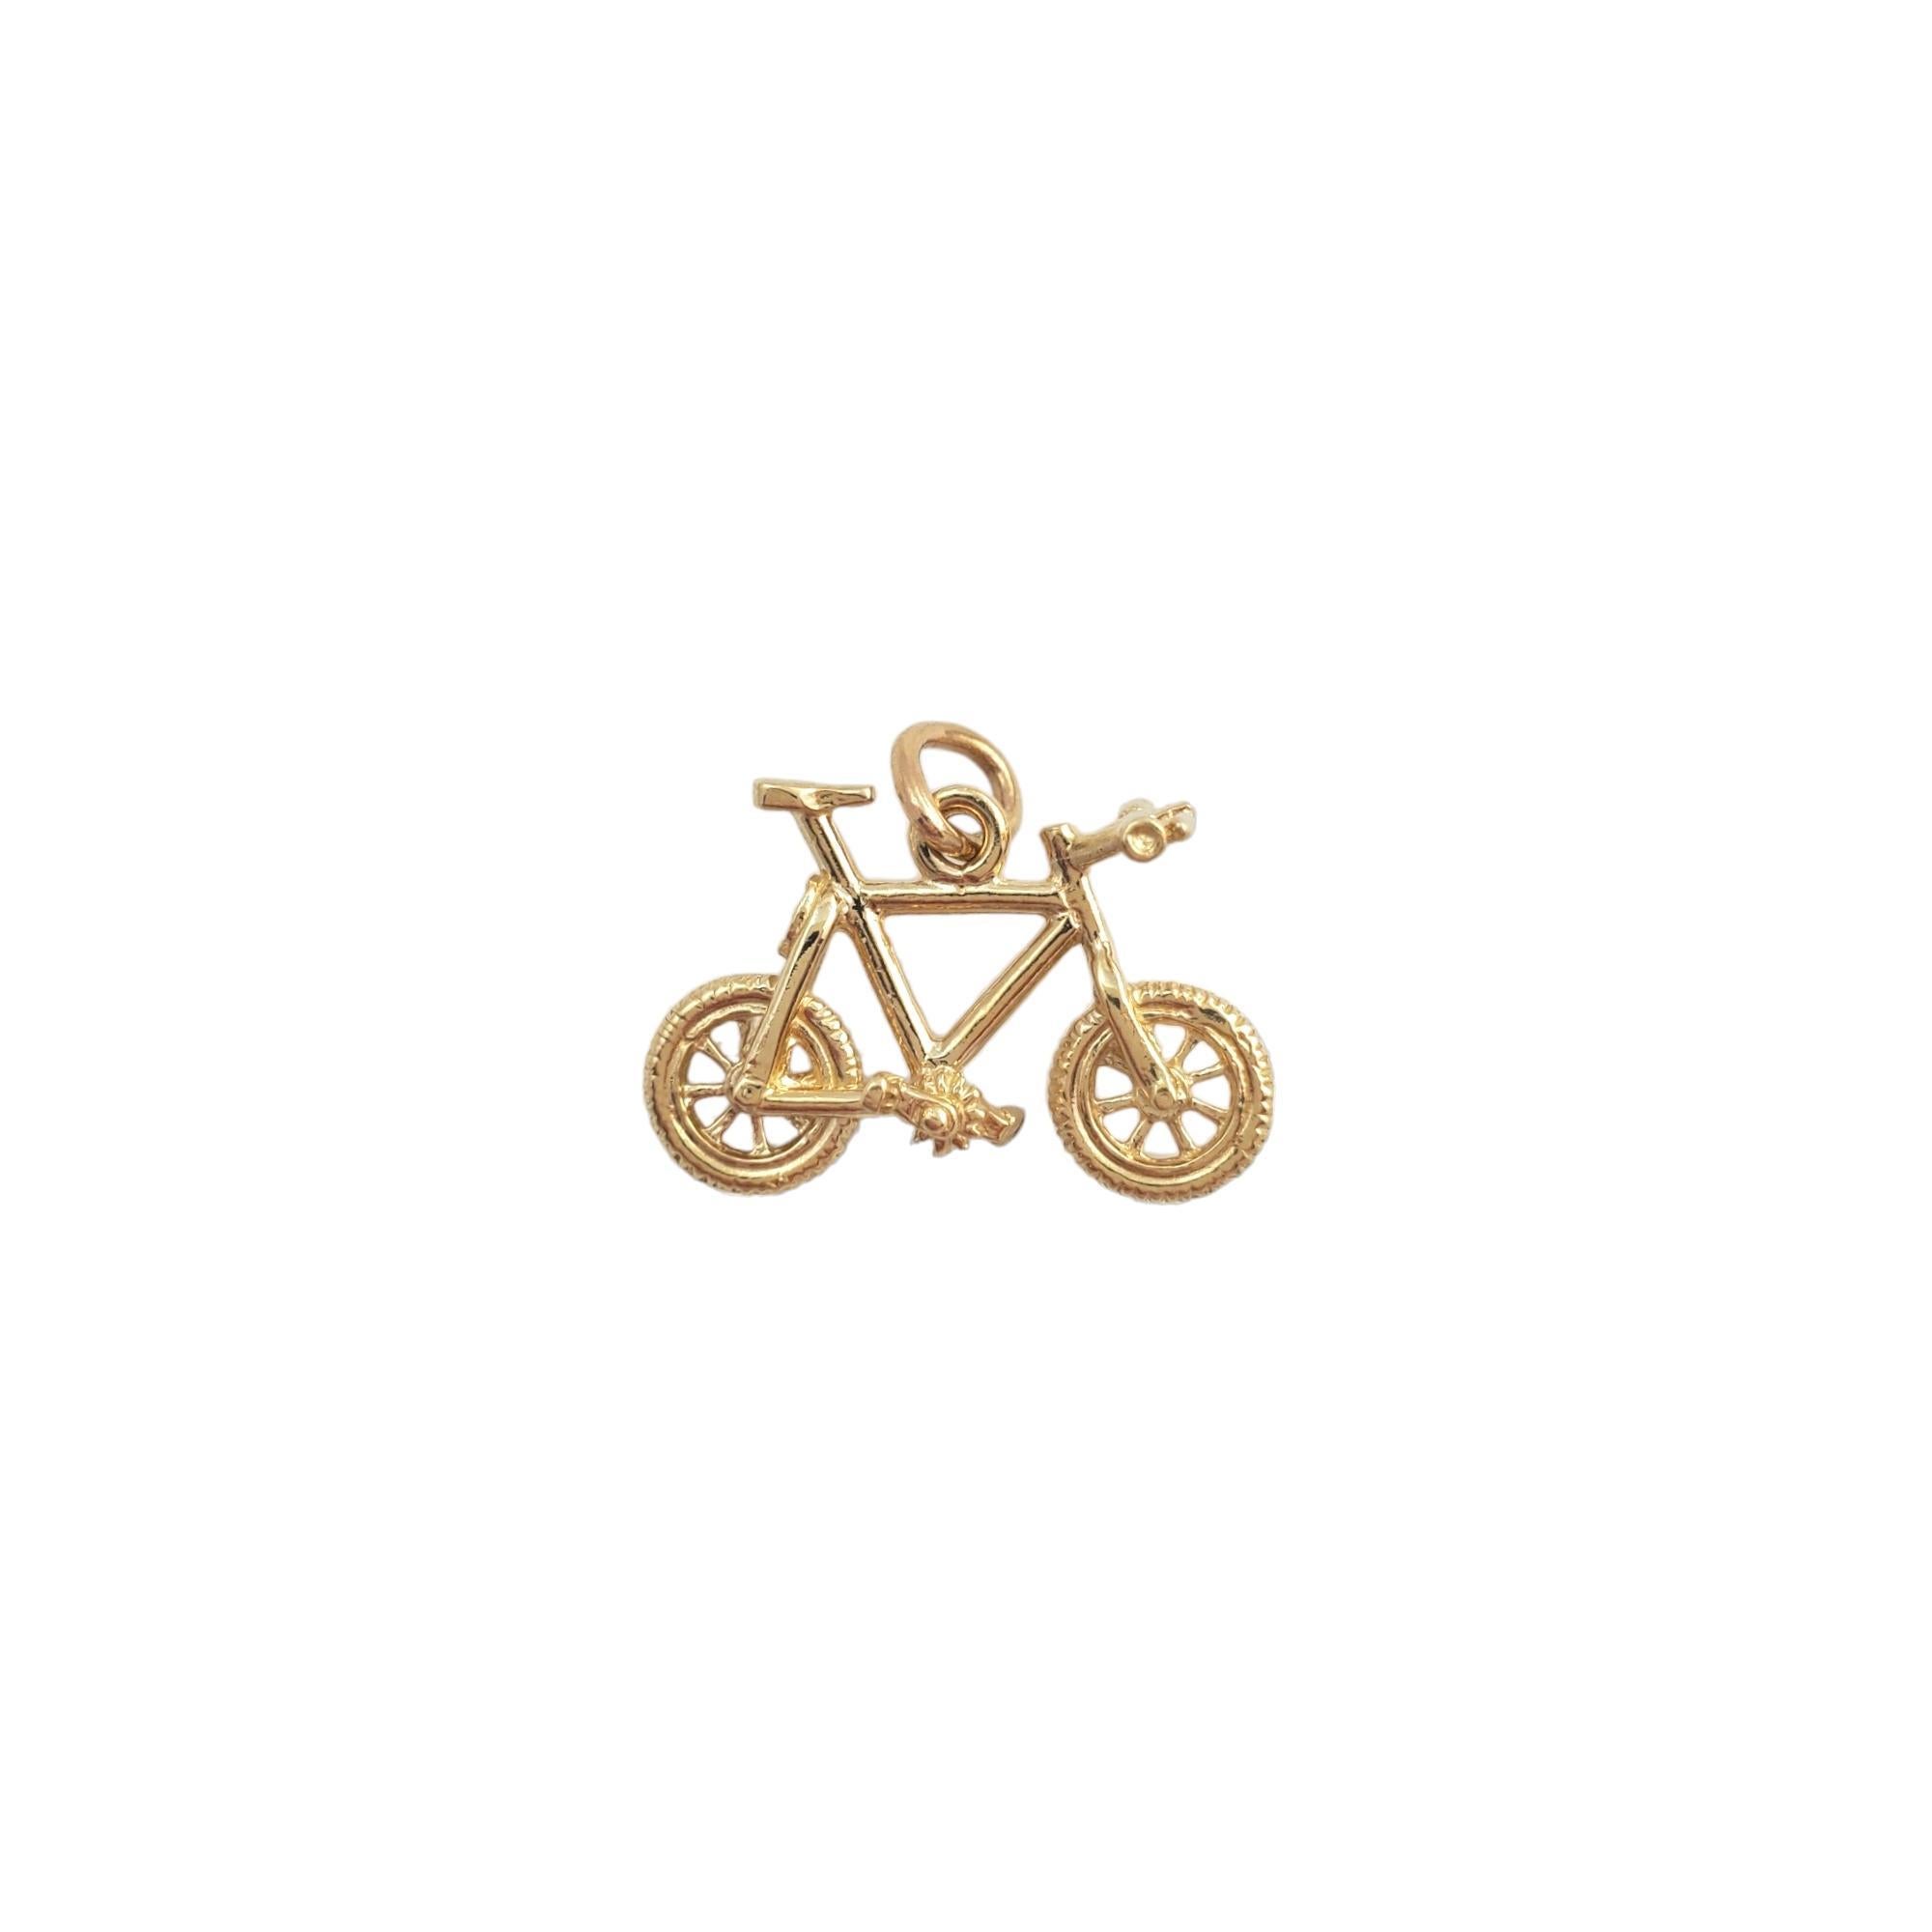 Vintage 14 karat yellow gold bicycle pendant -

This lovely bicycle pendant is a symbol of exploration and is set in beautifully detailed 14K yellow gold.

Size: 12.6mm x 21.0mm x 9.2mm

Stamped: 14K RQC

Weight: 2.0 gr./ 1.2 dwt.

Chain not